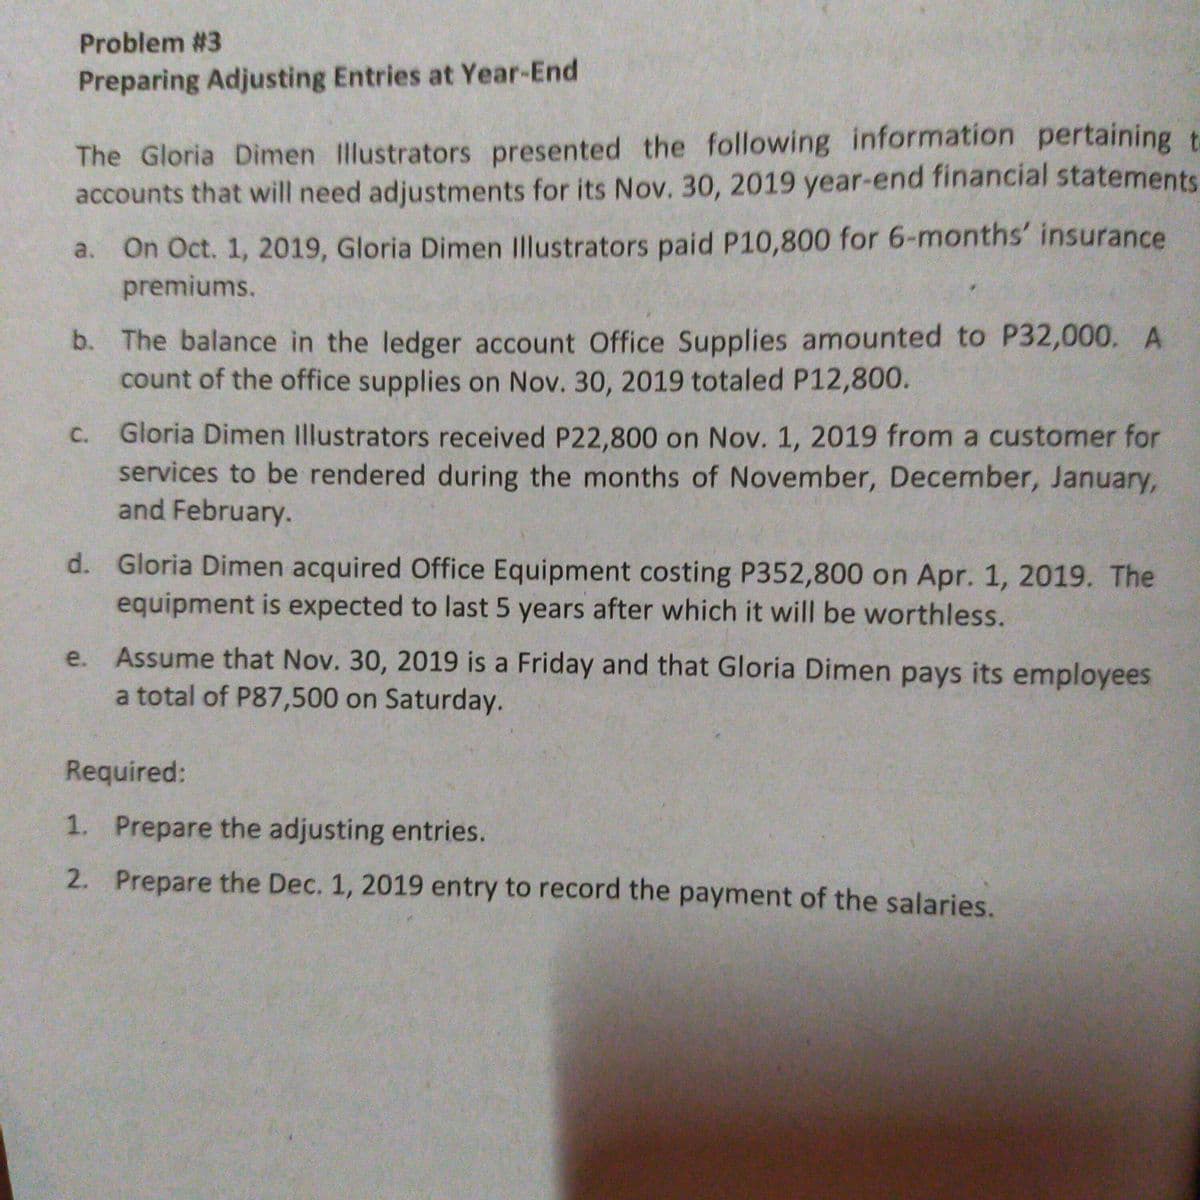 Problem #3
Preparing Adjusting Entries at Year-End
The Gloria Dimen Illustrators presented the following information pertaining t
accounts that will need adjustments for its Nov. 30, 2019 year-end financial statements
On Oct. 1, 2019, Gloria Dimen Illustrators paid P10,800 for 6-months' insurance
premiums.
a.
b. The balance in the ledger account Office Supplies amounted to P32,000. A
count of the office supplies on Nov. 30, 2019 totaled P12,800.
Gloria Dimen Illustrators received P22,800 on Nov. 1, 2019 from a customer for
services to be rendered during the months of November, December, January,
and February.
C.
d. Gloria Dimen acquired Office Equipment costing P352,800 on Apr. 1, 2019. The
equipment is expected to last 5 years after which it will be worthless.
e. Assume that Nov. 30, 2019 is a Friday and that Gloria Dimen pays its employees
a total of P87,500 on Saturday.
Required:
1. Prepare the adjusting entries.
2. Prepare the Dec. 1, 2019 entry to record the payment of the salaries.
